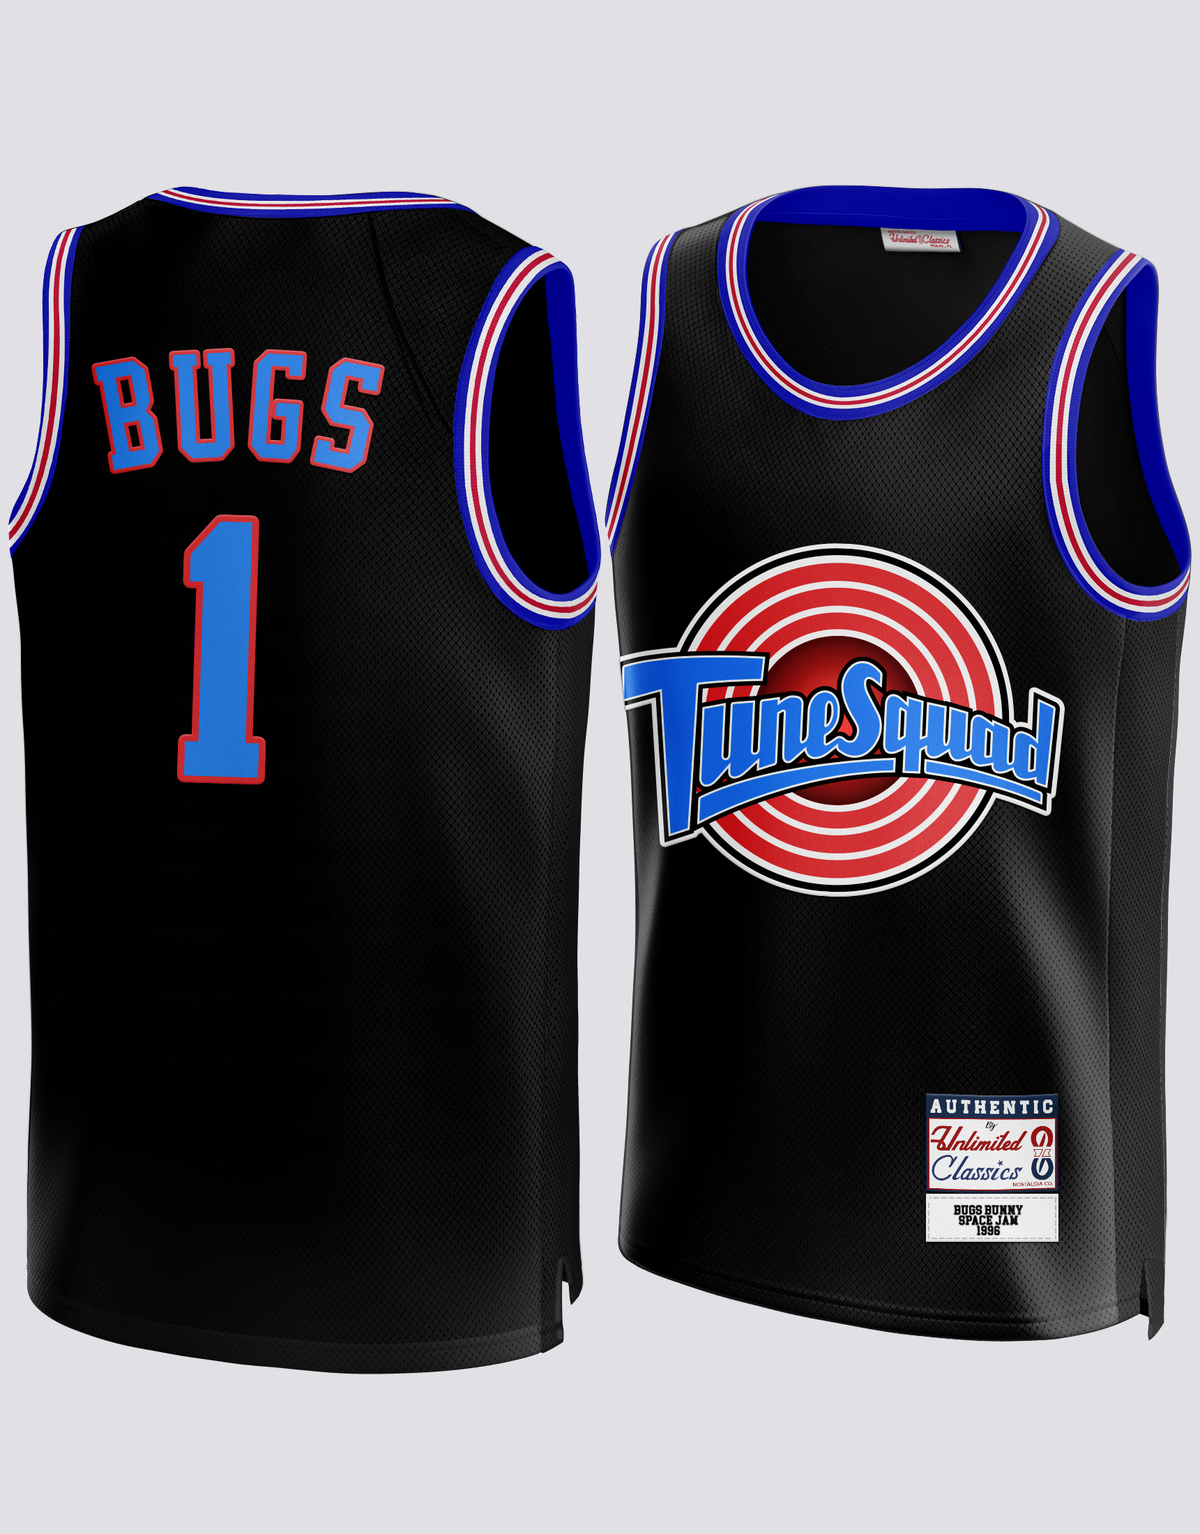 Bugs Bunny #1 Space Jam Tune Squad Black Basketball Jersey